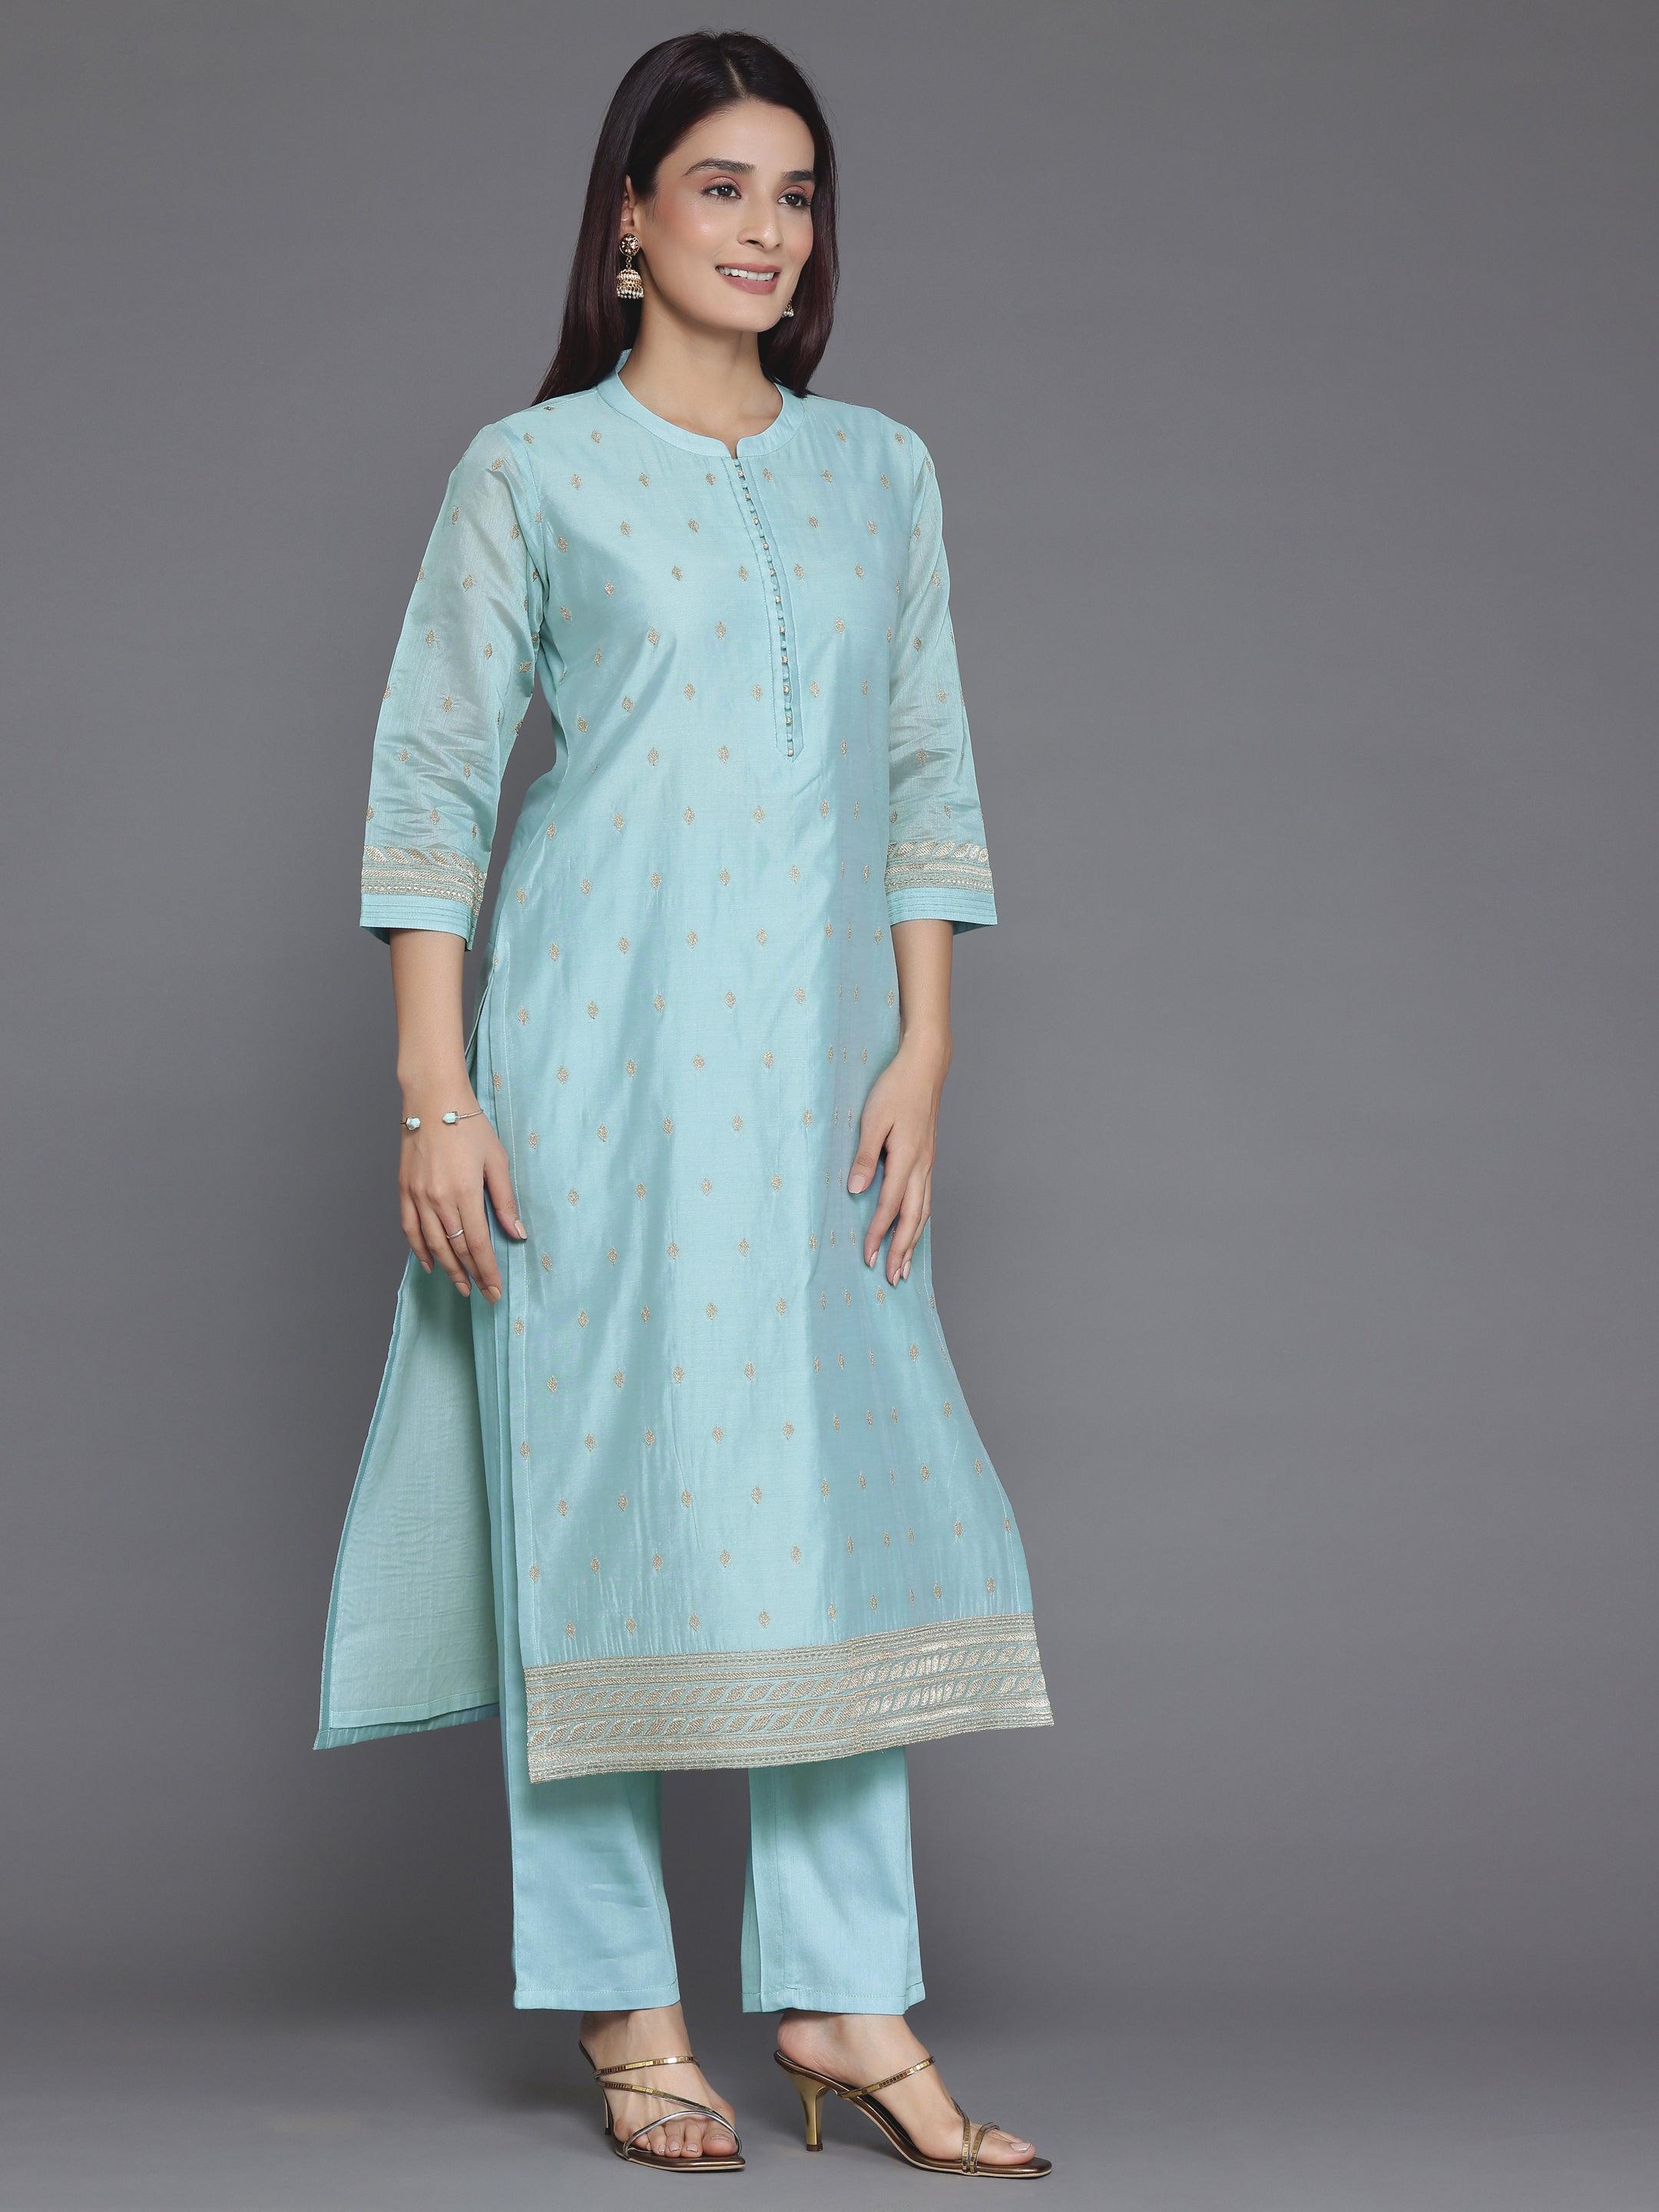 Blue Embroidered Chanderi Silk Straight Suit With Dupatta